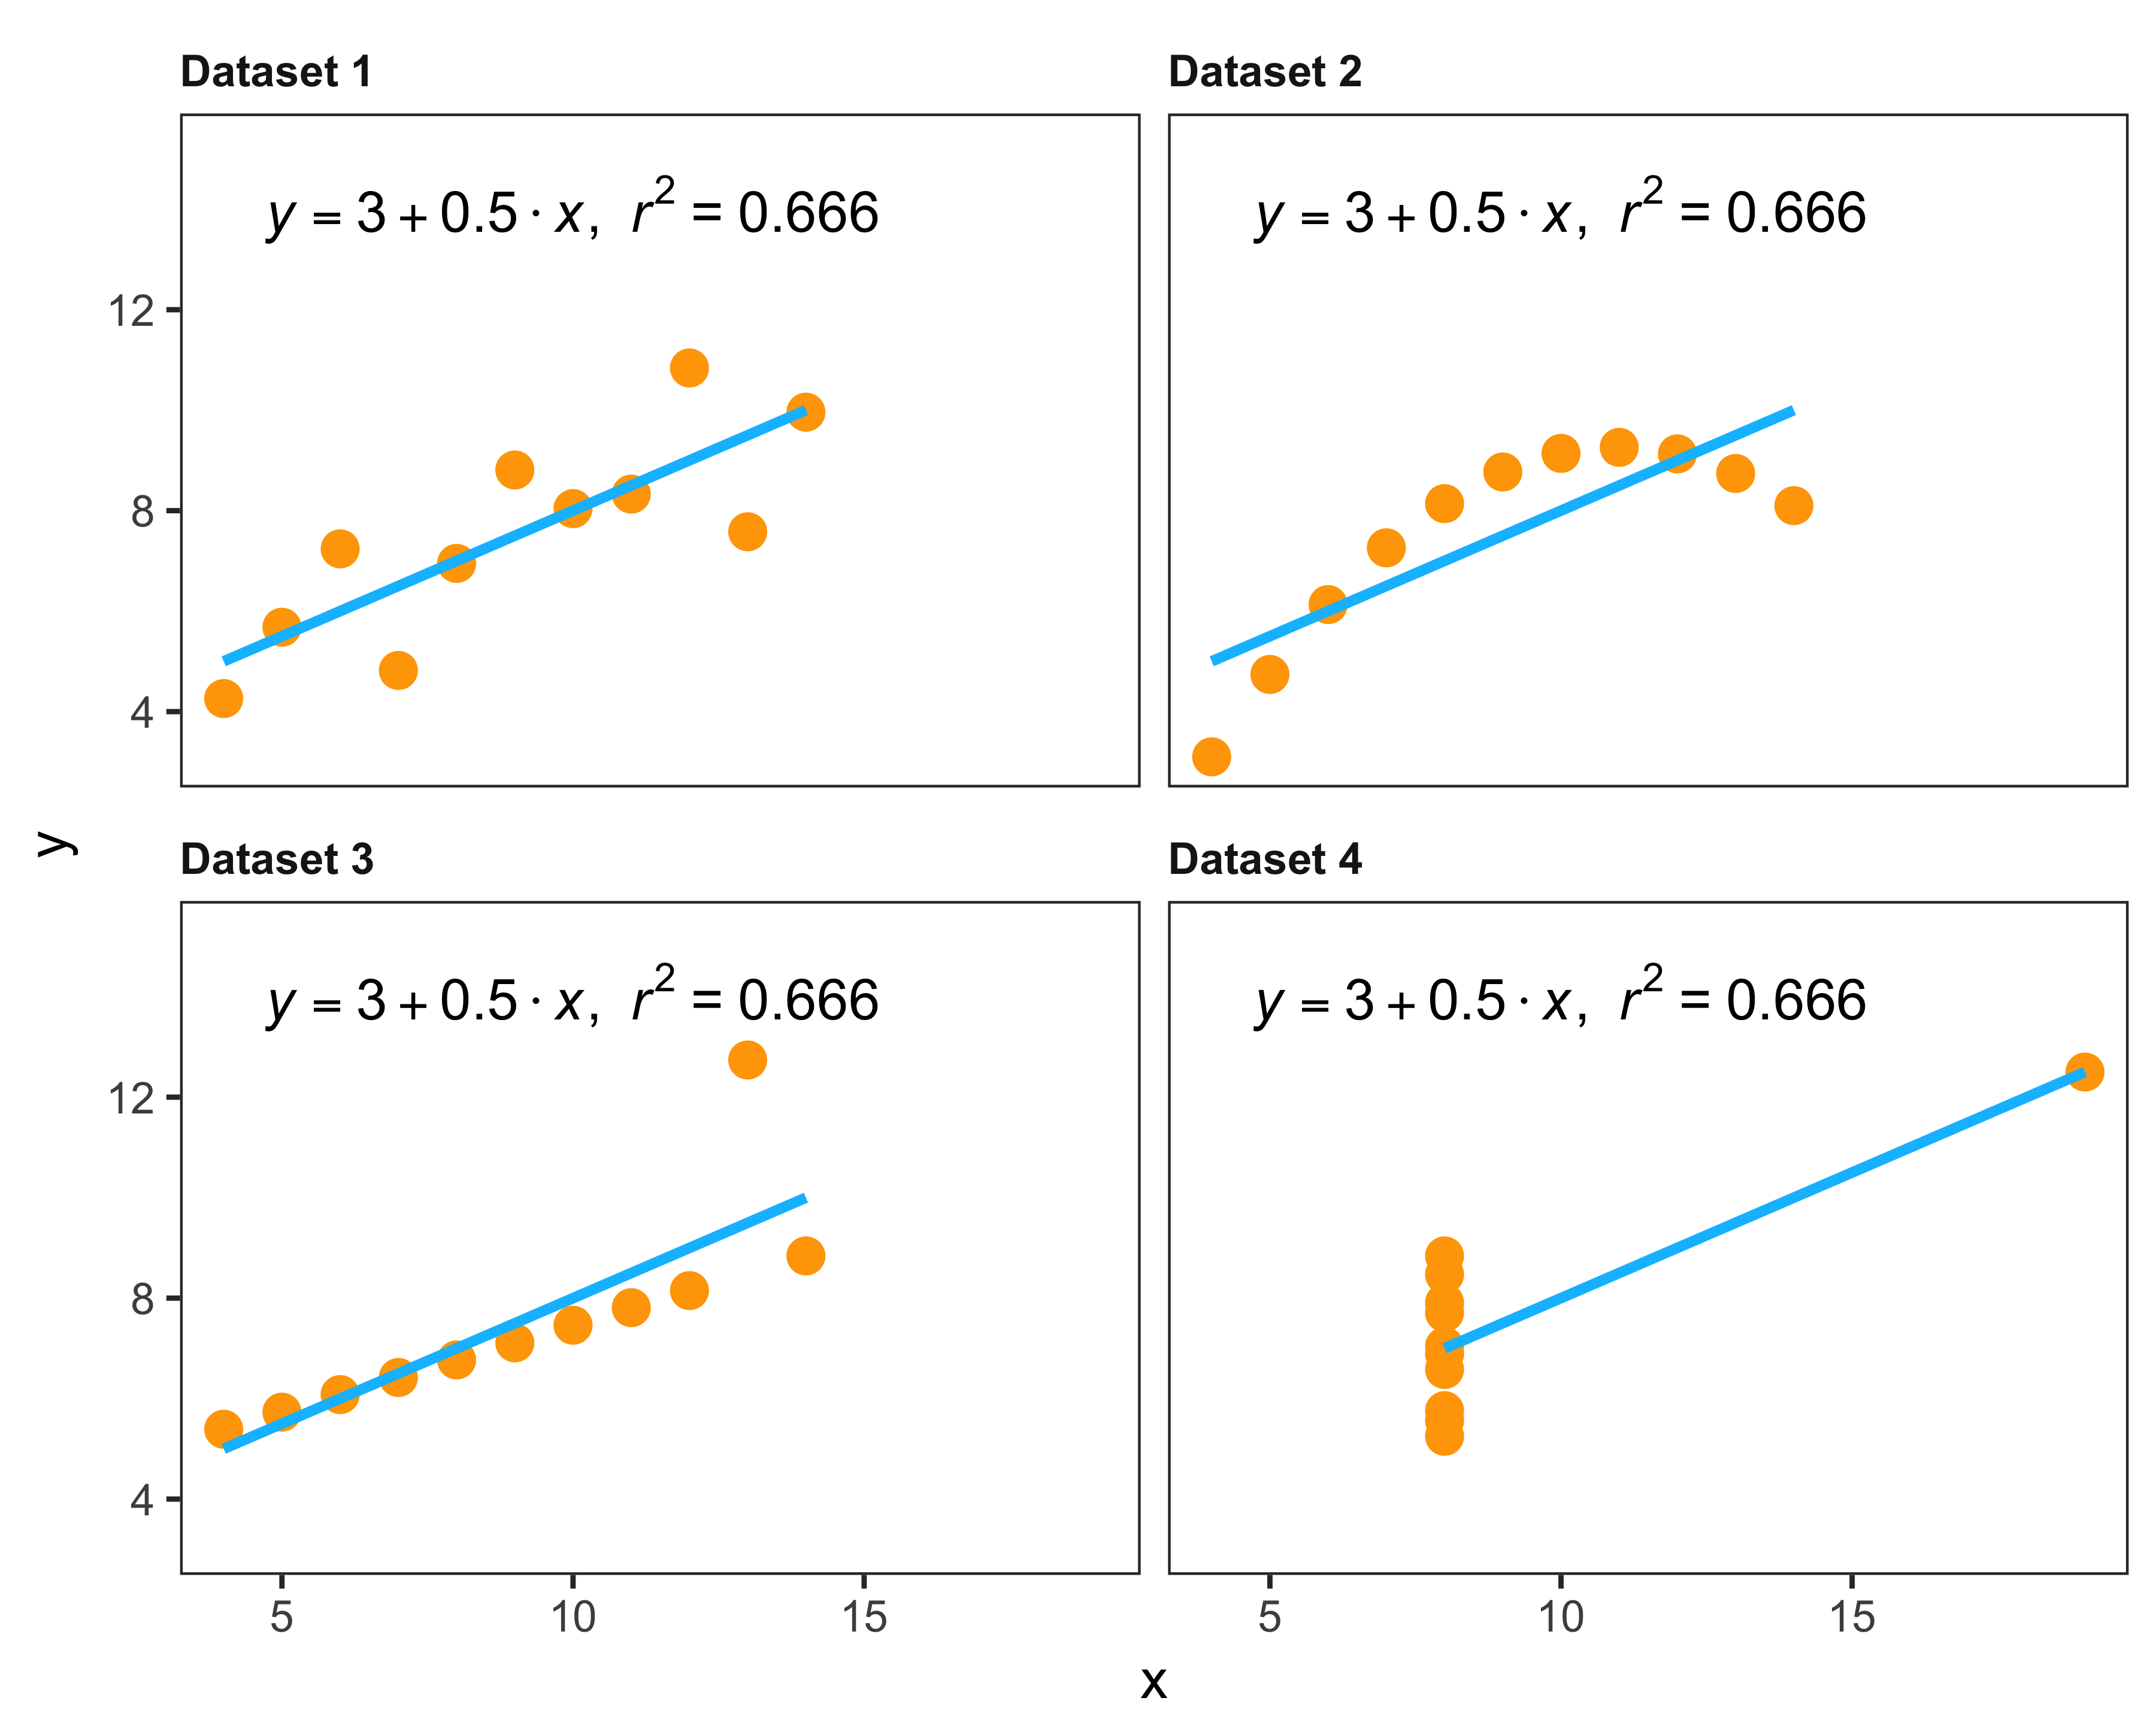 Anscombe's quartet: four different data sets with similar statistical properties